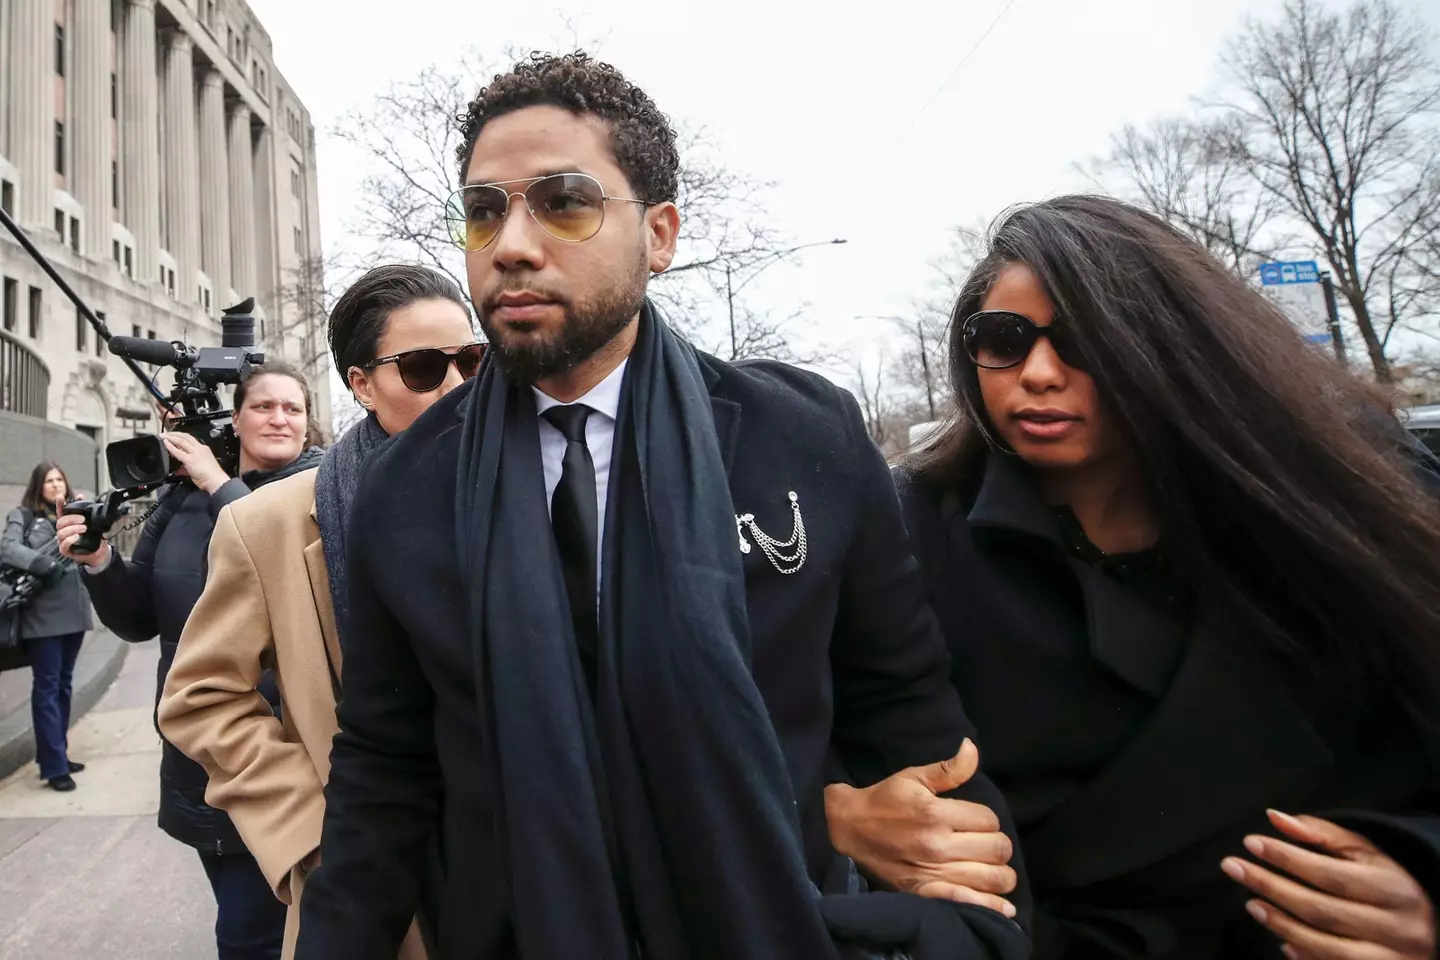 Smollett arriving in court for his arraignment.